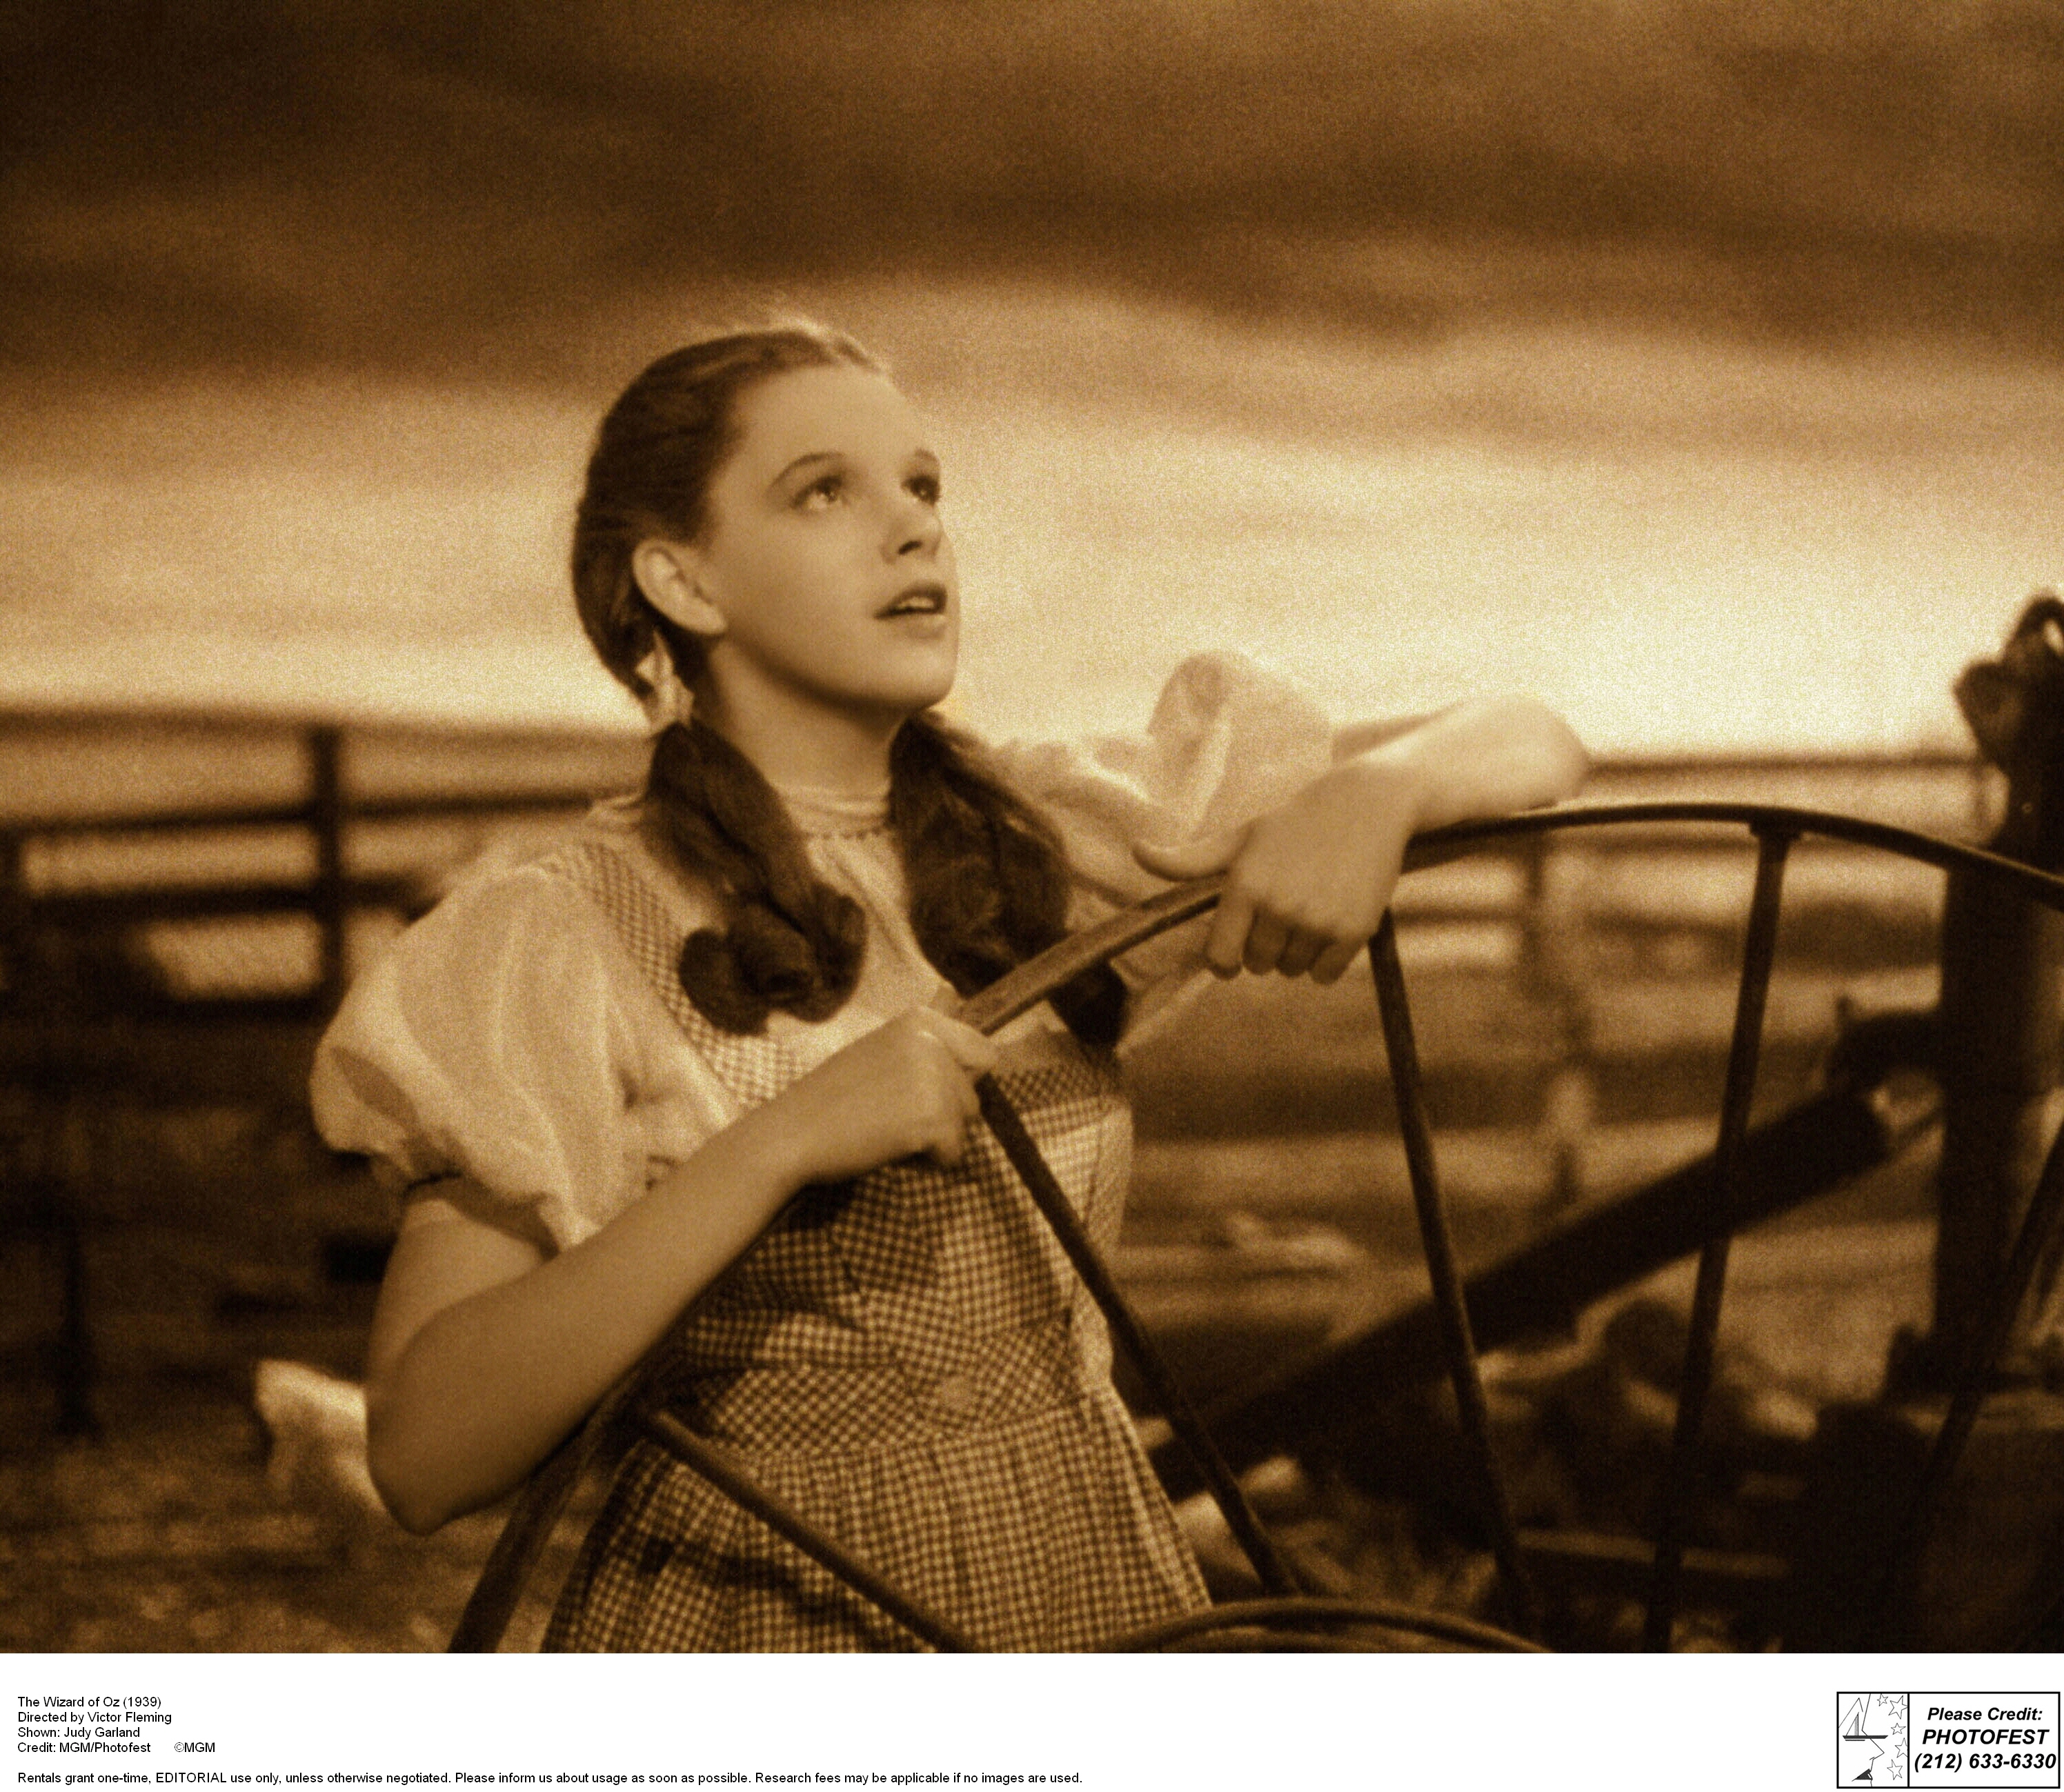 The Wonderful Paradoxes of 'The Wizard of Oz' | Hopkins Center for the Arts at Dartmouth